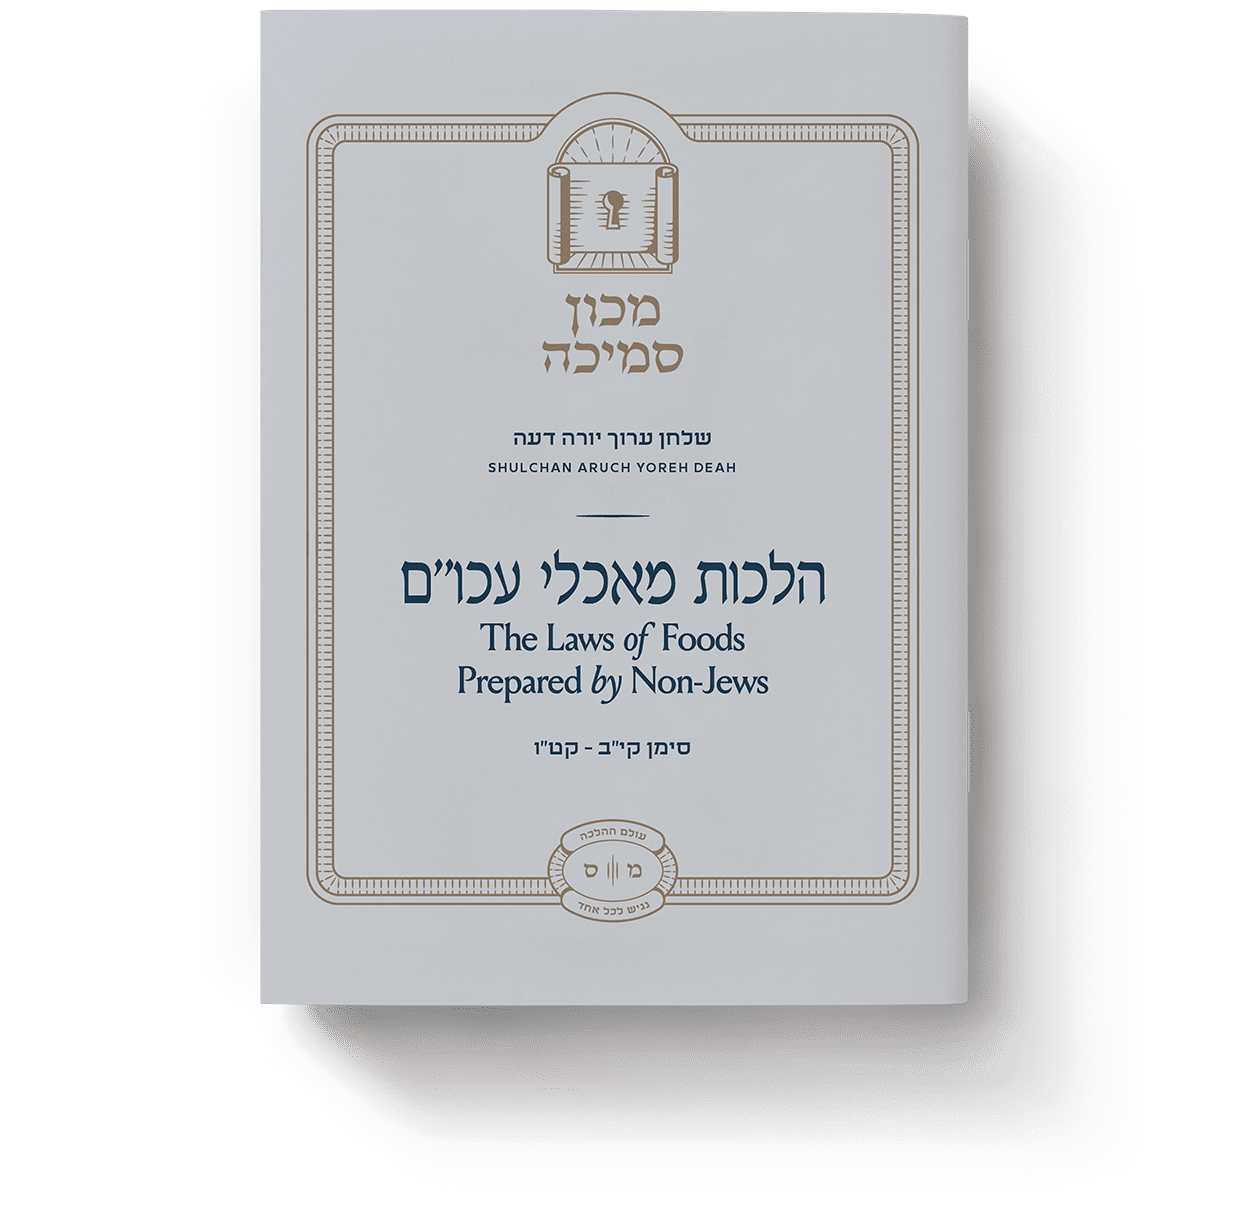 2. Hilchos Ma’achalei Aku”m(The Laws of Foods of Non-Jews)

שלחן ערוך יורה דעה סימנים קי”ב,- קט”ו,


Forbidden foods, steps to be taken to permit such foods. Includes discussions on pas aku"m, bishul aku”m, chalav aku”m, gevinas aku”m, and other discussions.